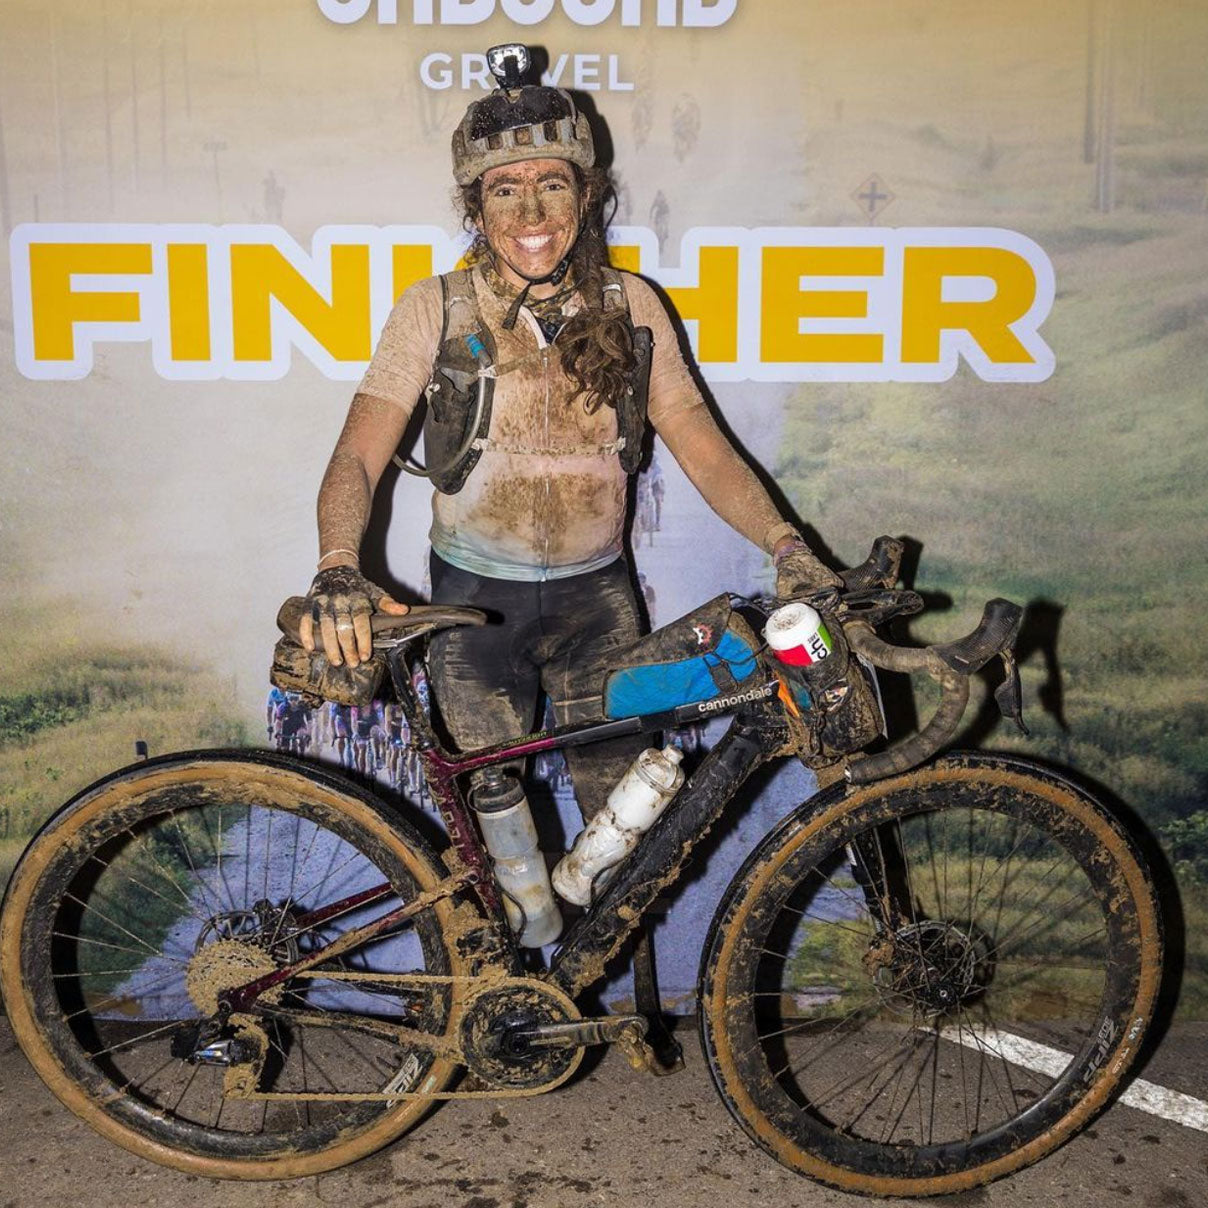 Meg Fisher covered in mud at the finish line for a race